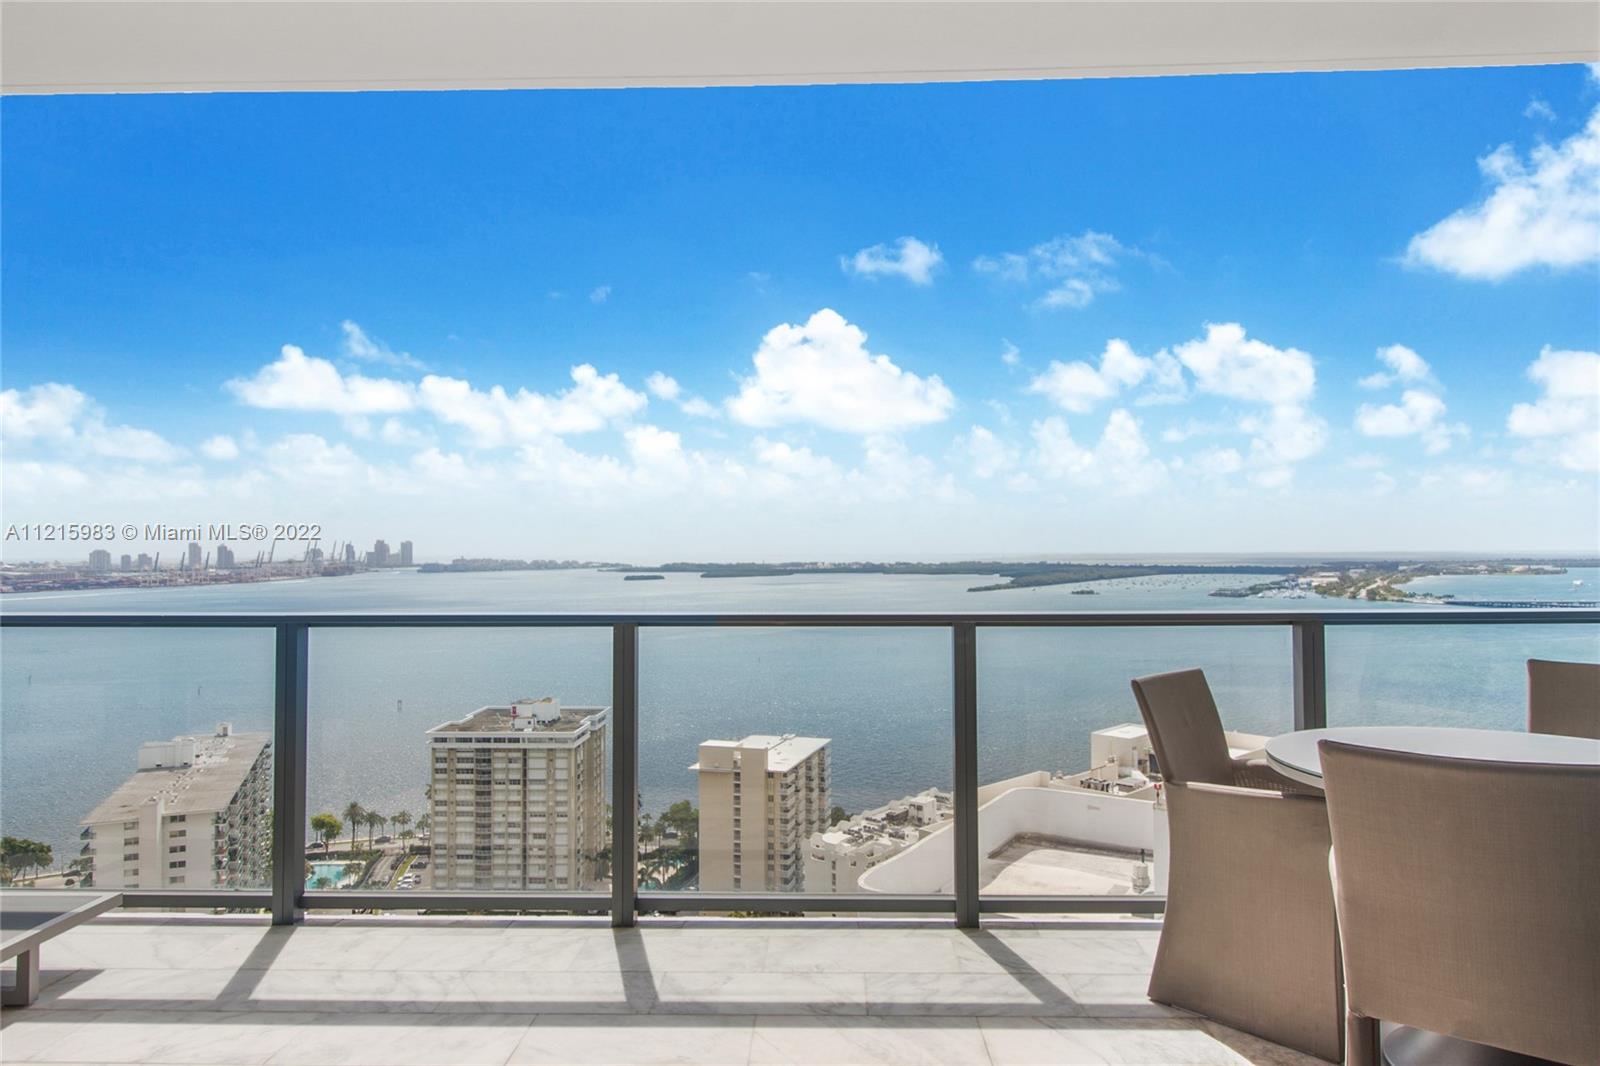 Your Home in the Sky in the most exclusive building in Brickell. TURNKEY Residence with Artefacto furniture. 3 Bed en suites/3.5 Bath with over 3,500 Sq Ft East to West flow through corner unit with endless breathtaking unobstructed Biscayne Bay & City views. 2 Terraces w/ Summer Kitchen.2 large living room spaces with built in Bar. Luxurious marble floors throughout. Modern kitchen with island & Italian glass cabinetry & latest Wolf, Bosch,& SubZero kitchen appliances including built in espresso maker & wine cooler. Apple Home Technology.3 Parking Spaces.Echo Brickell is a 5 Star Resort style living designed by world renowned architect Carlos Ott.Amenities include Infinity Pool,Hot Tubs,Bar with food & drinks,Fitness Center, In House Chaffeur services, 24 Hour Valet, Security,& concierge.